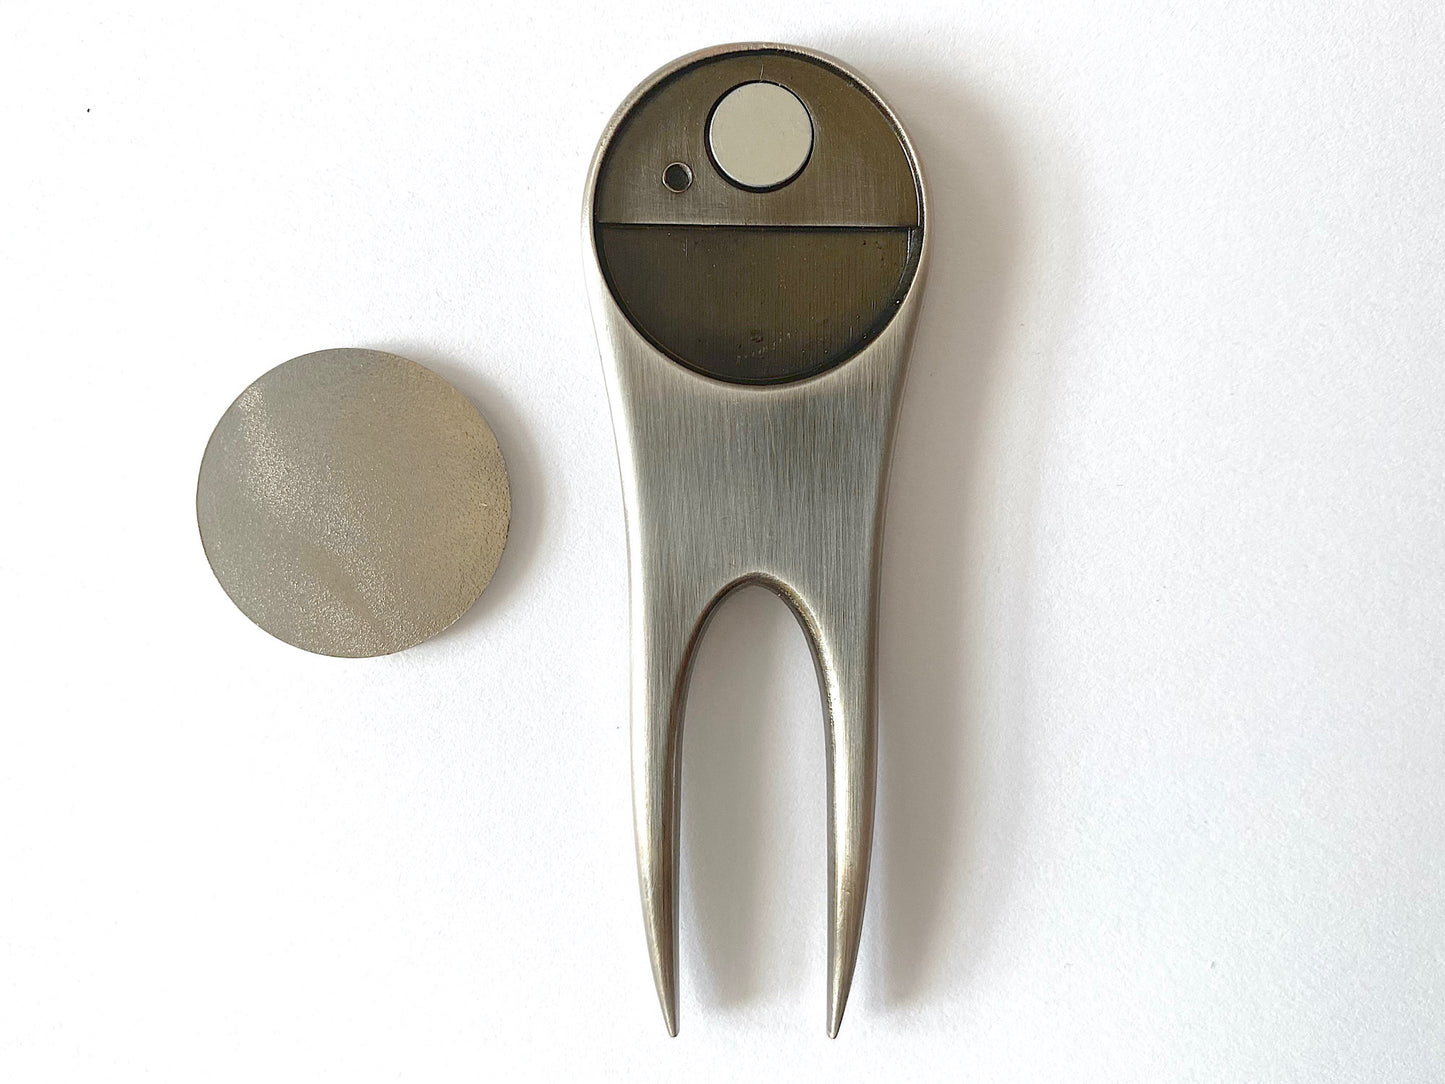 Signal Corps Divot Tool and Ball Marker